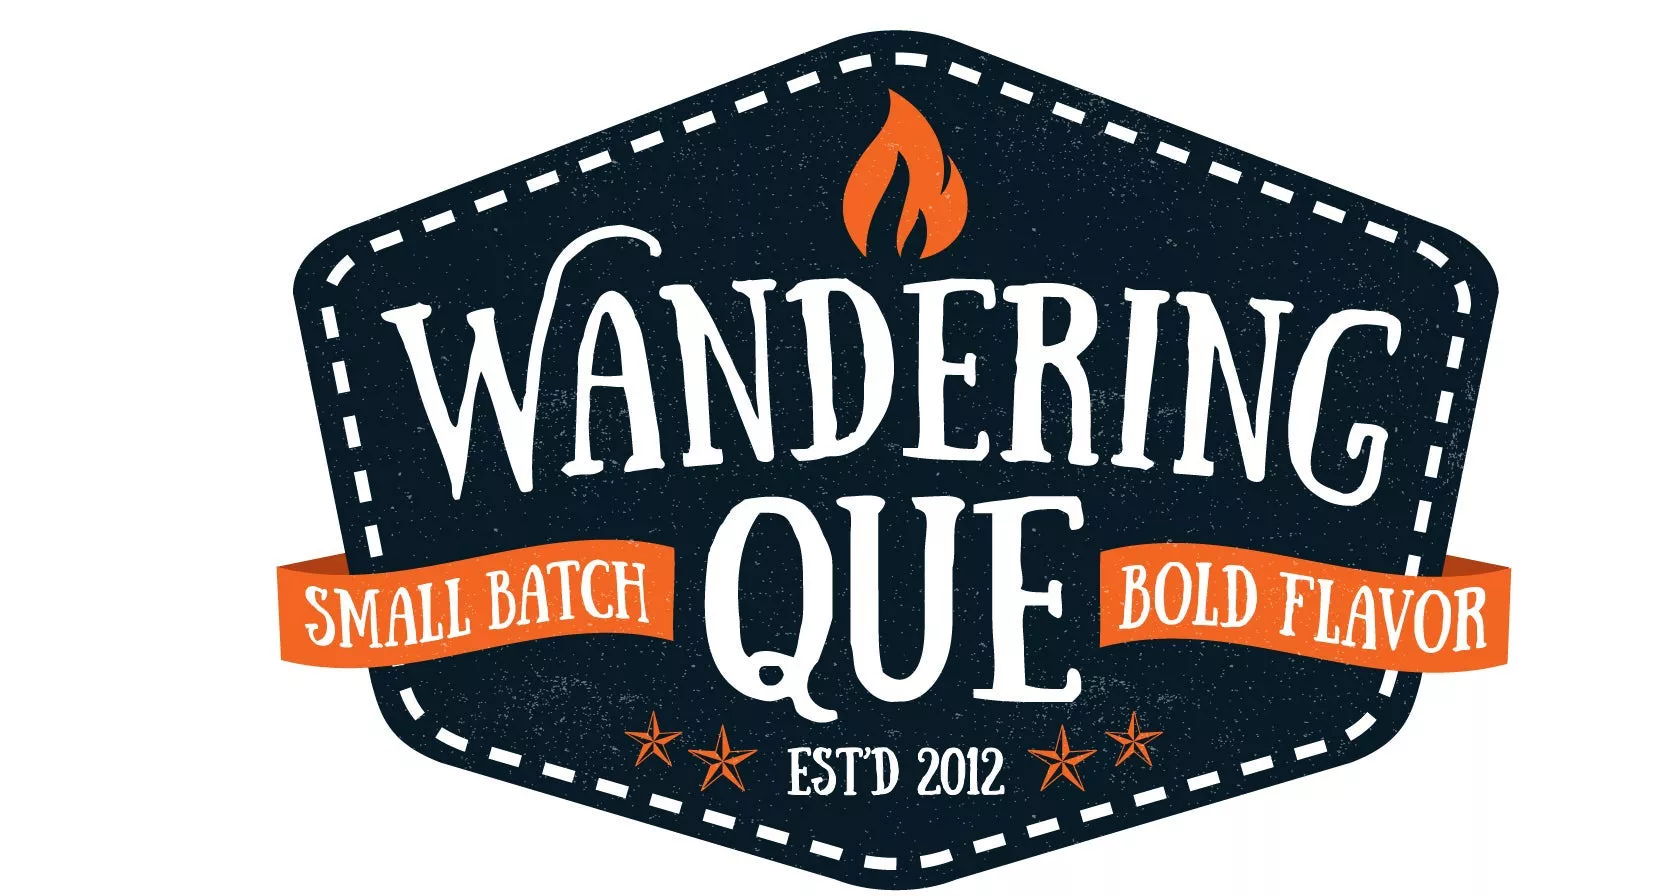 The Wandering Que